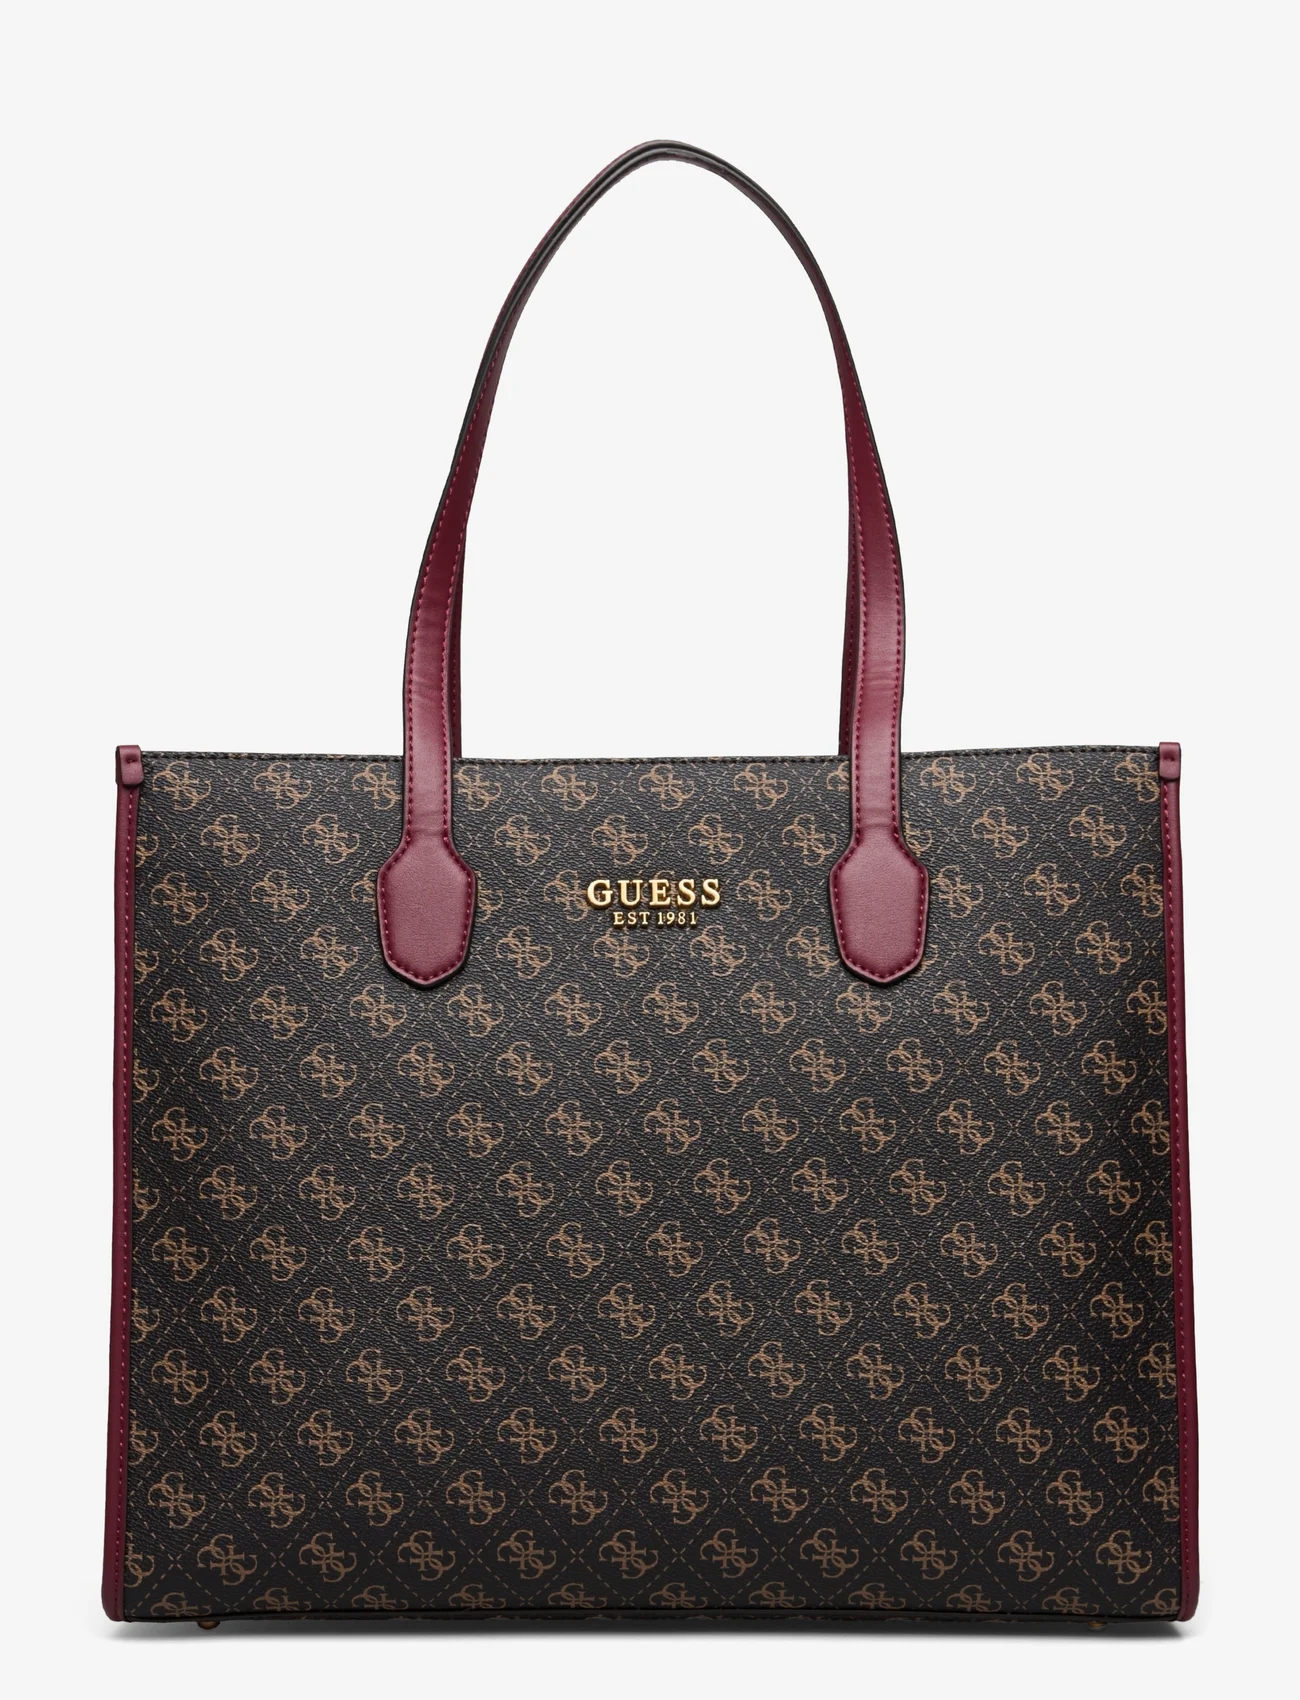 GUESS Silvana Tote - Shoppers - Boozt.com